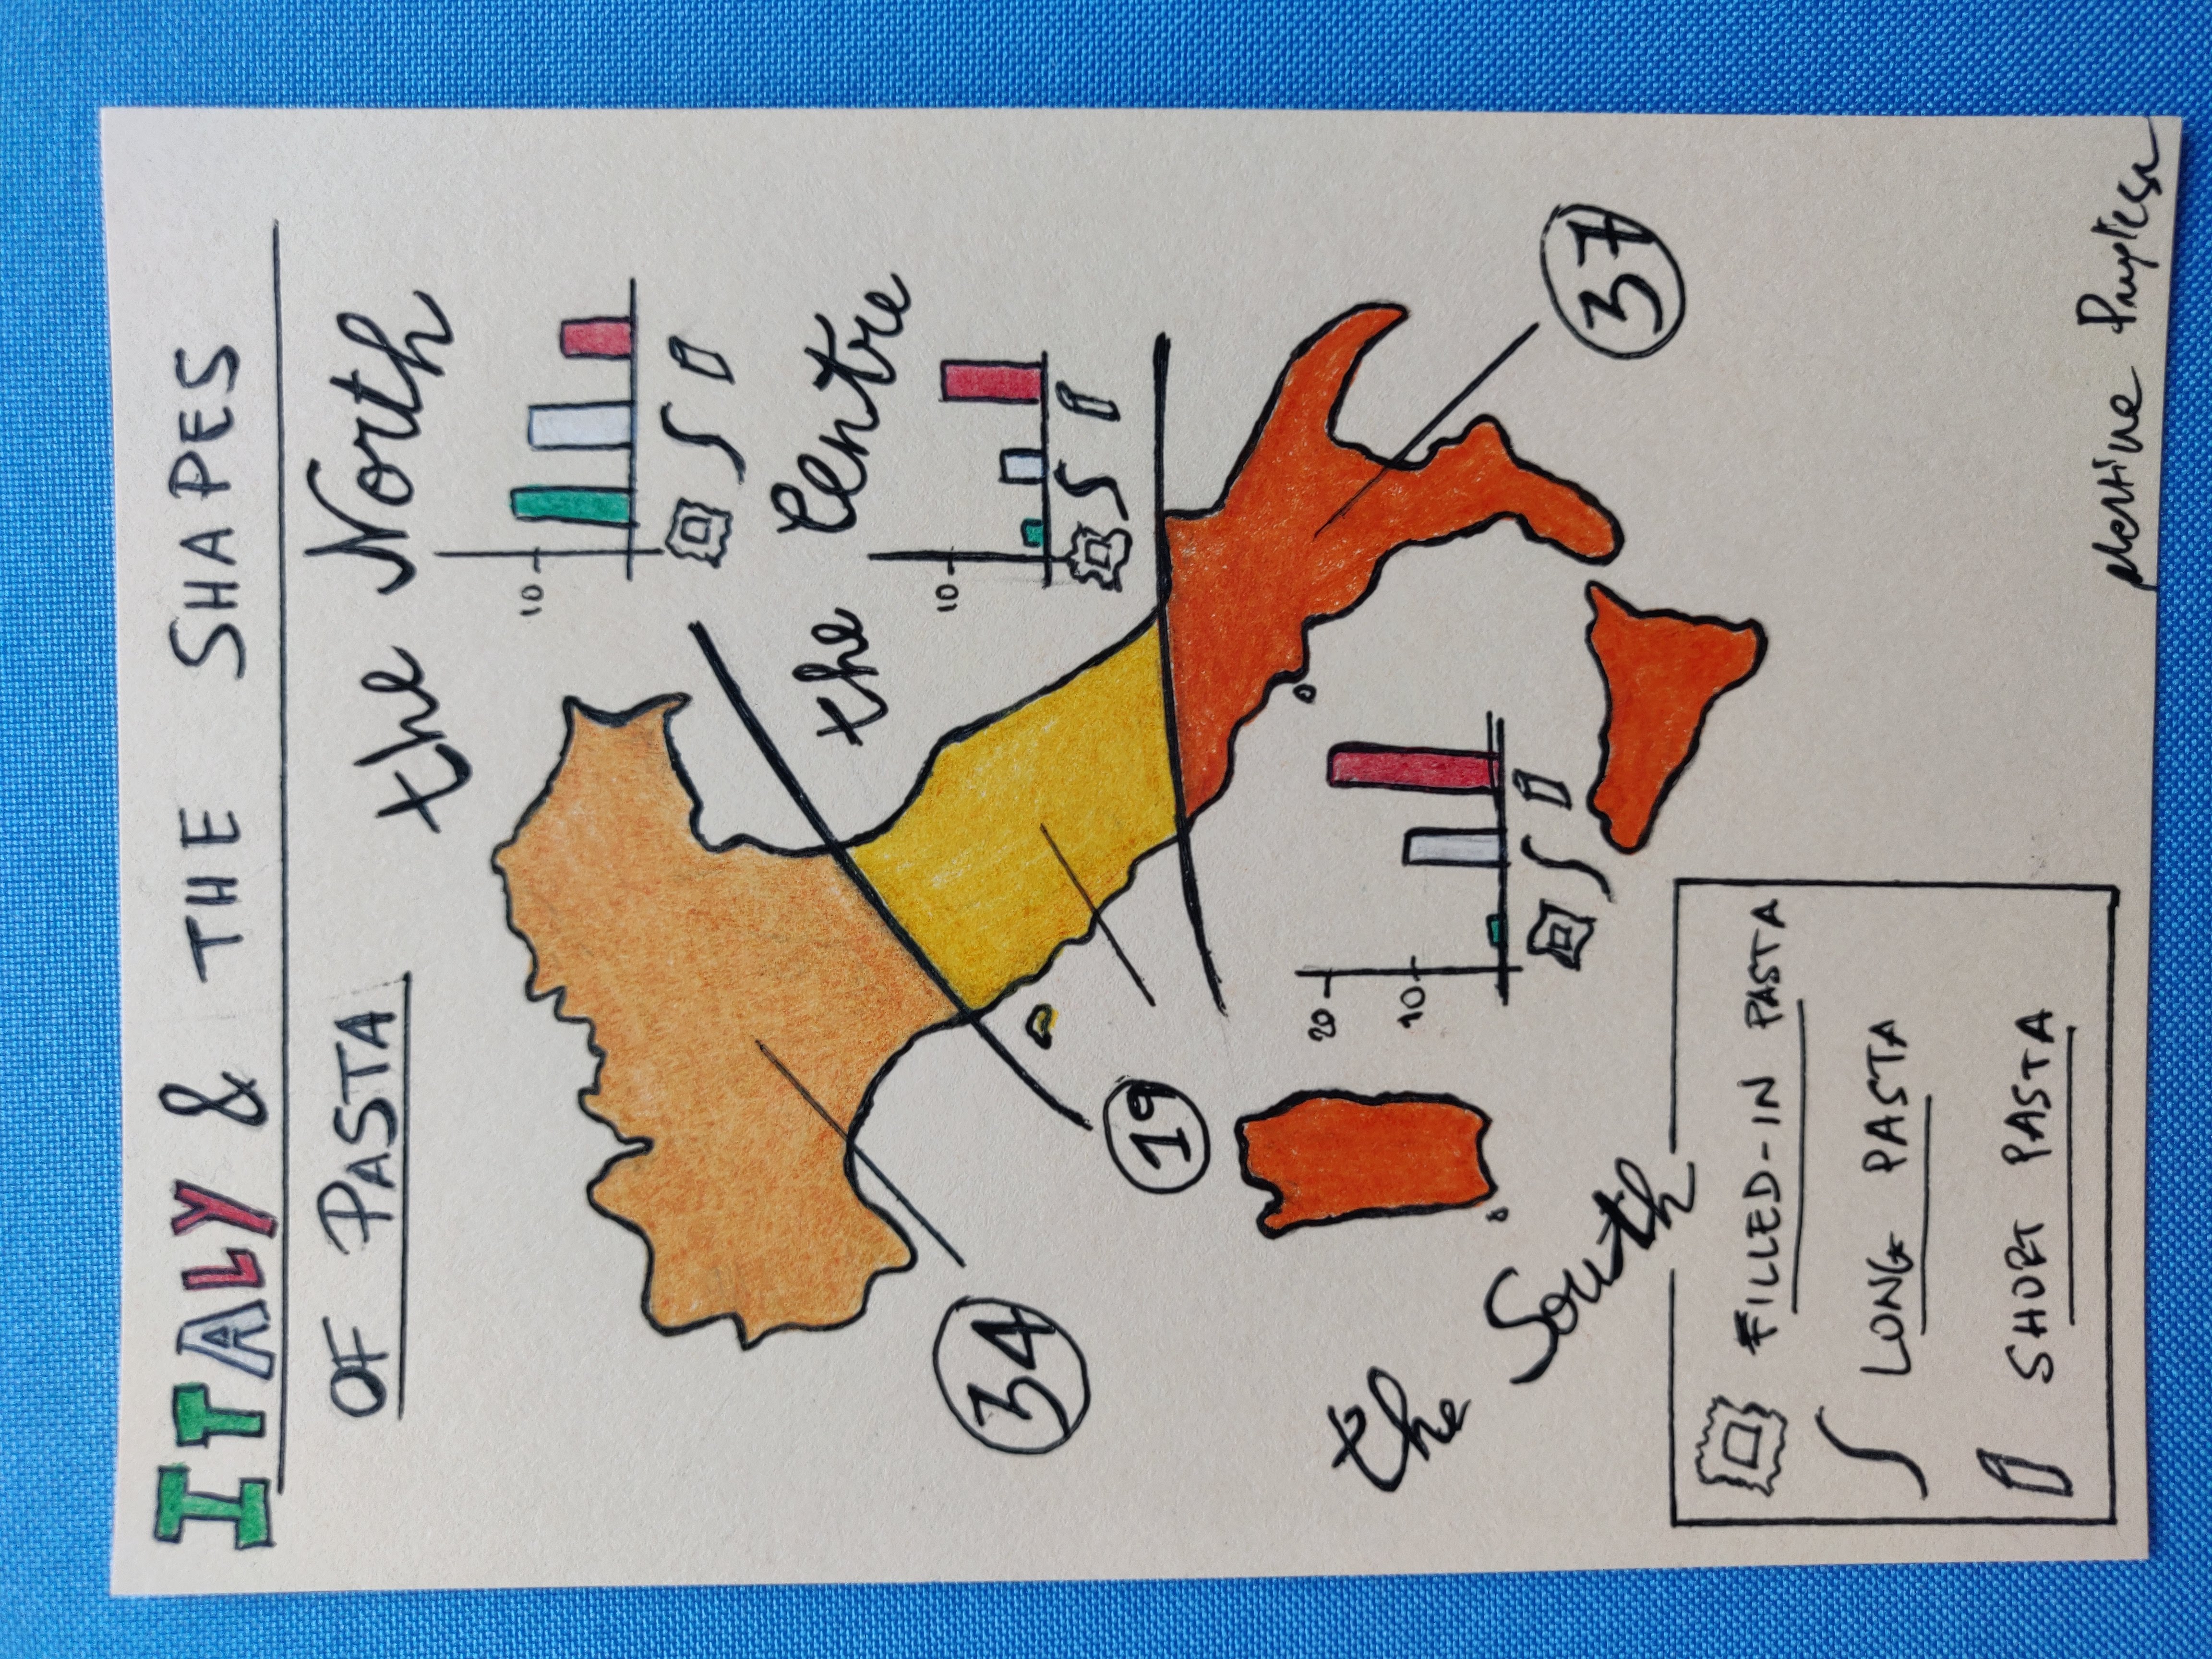 A hand-drawn map of Italy divided into its three main areas (north, center, south) and the count of pasta shapes for each group, by format (long, short, filled).